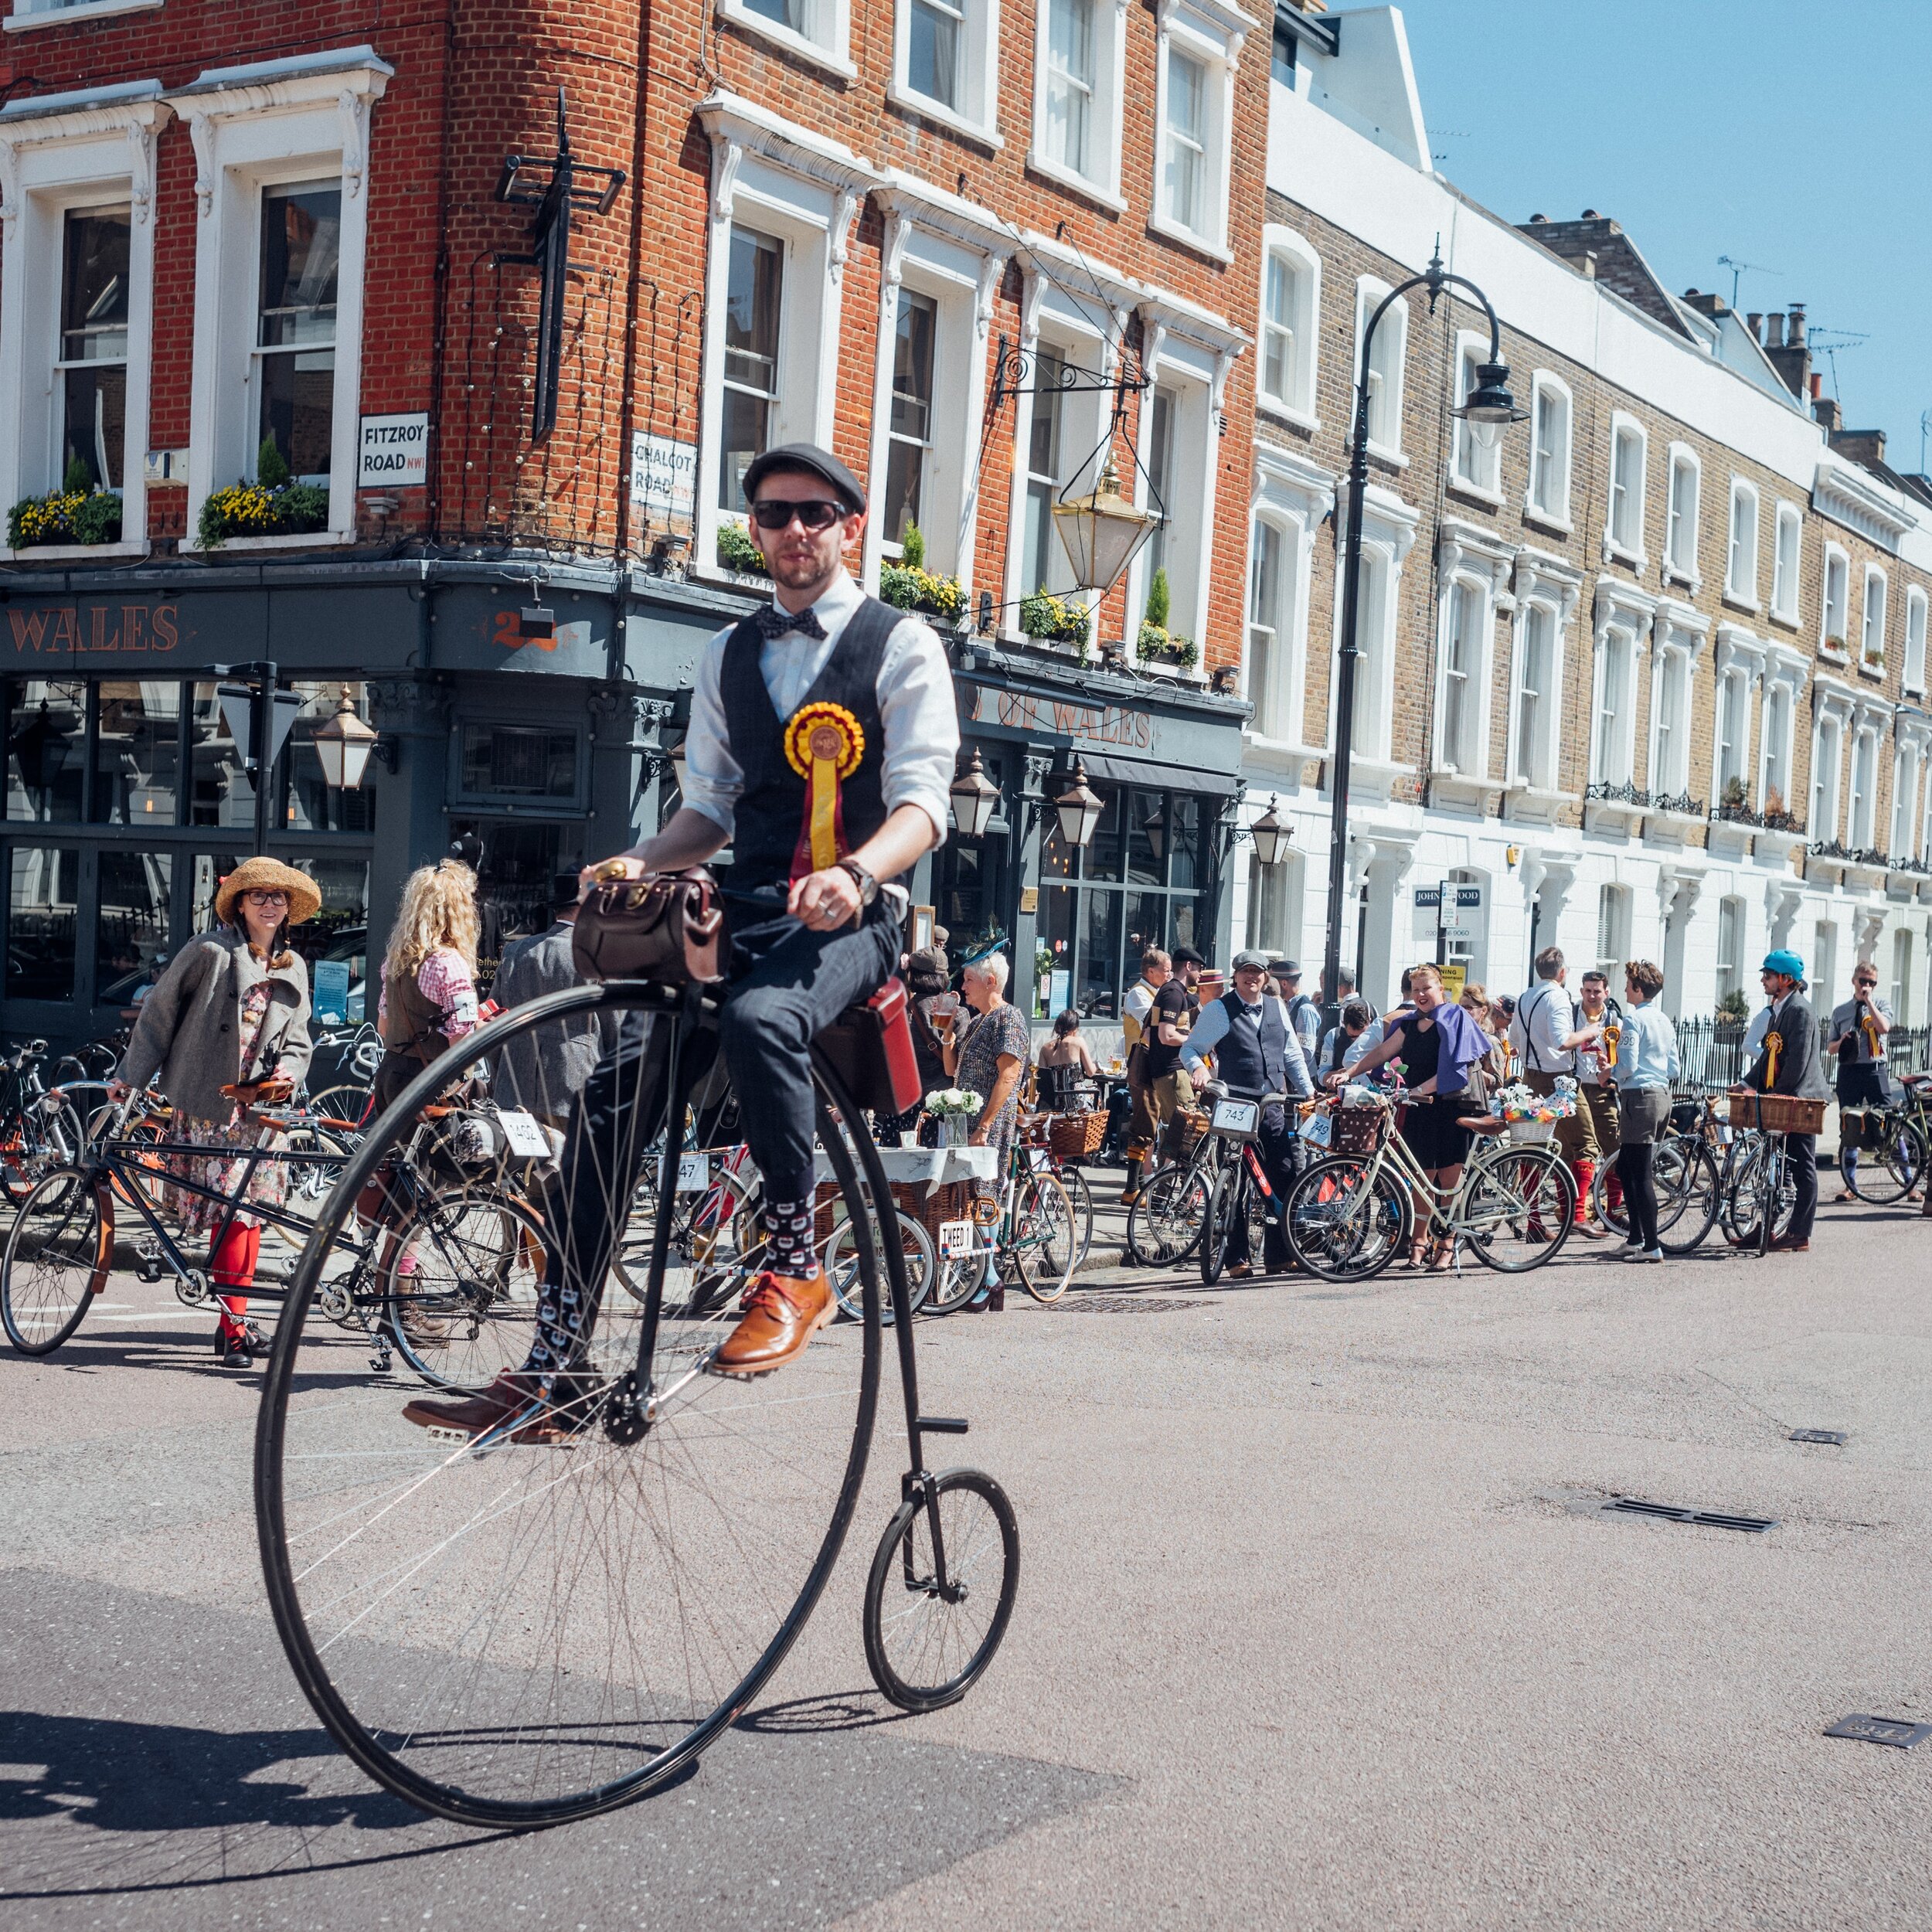 Bring your bicycle, whatever its pedigree. Previous runs have seen everything from tandem bikes to Penny Farthings, paired with the sharpest tailoring and the boldest of tweeds.